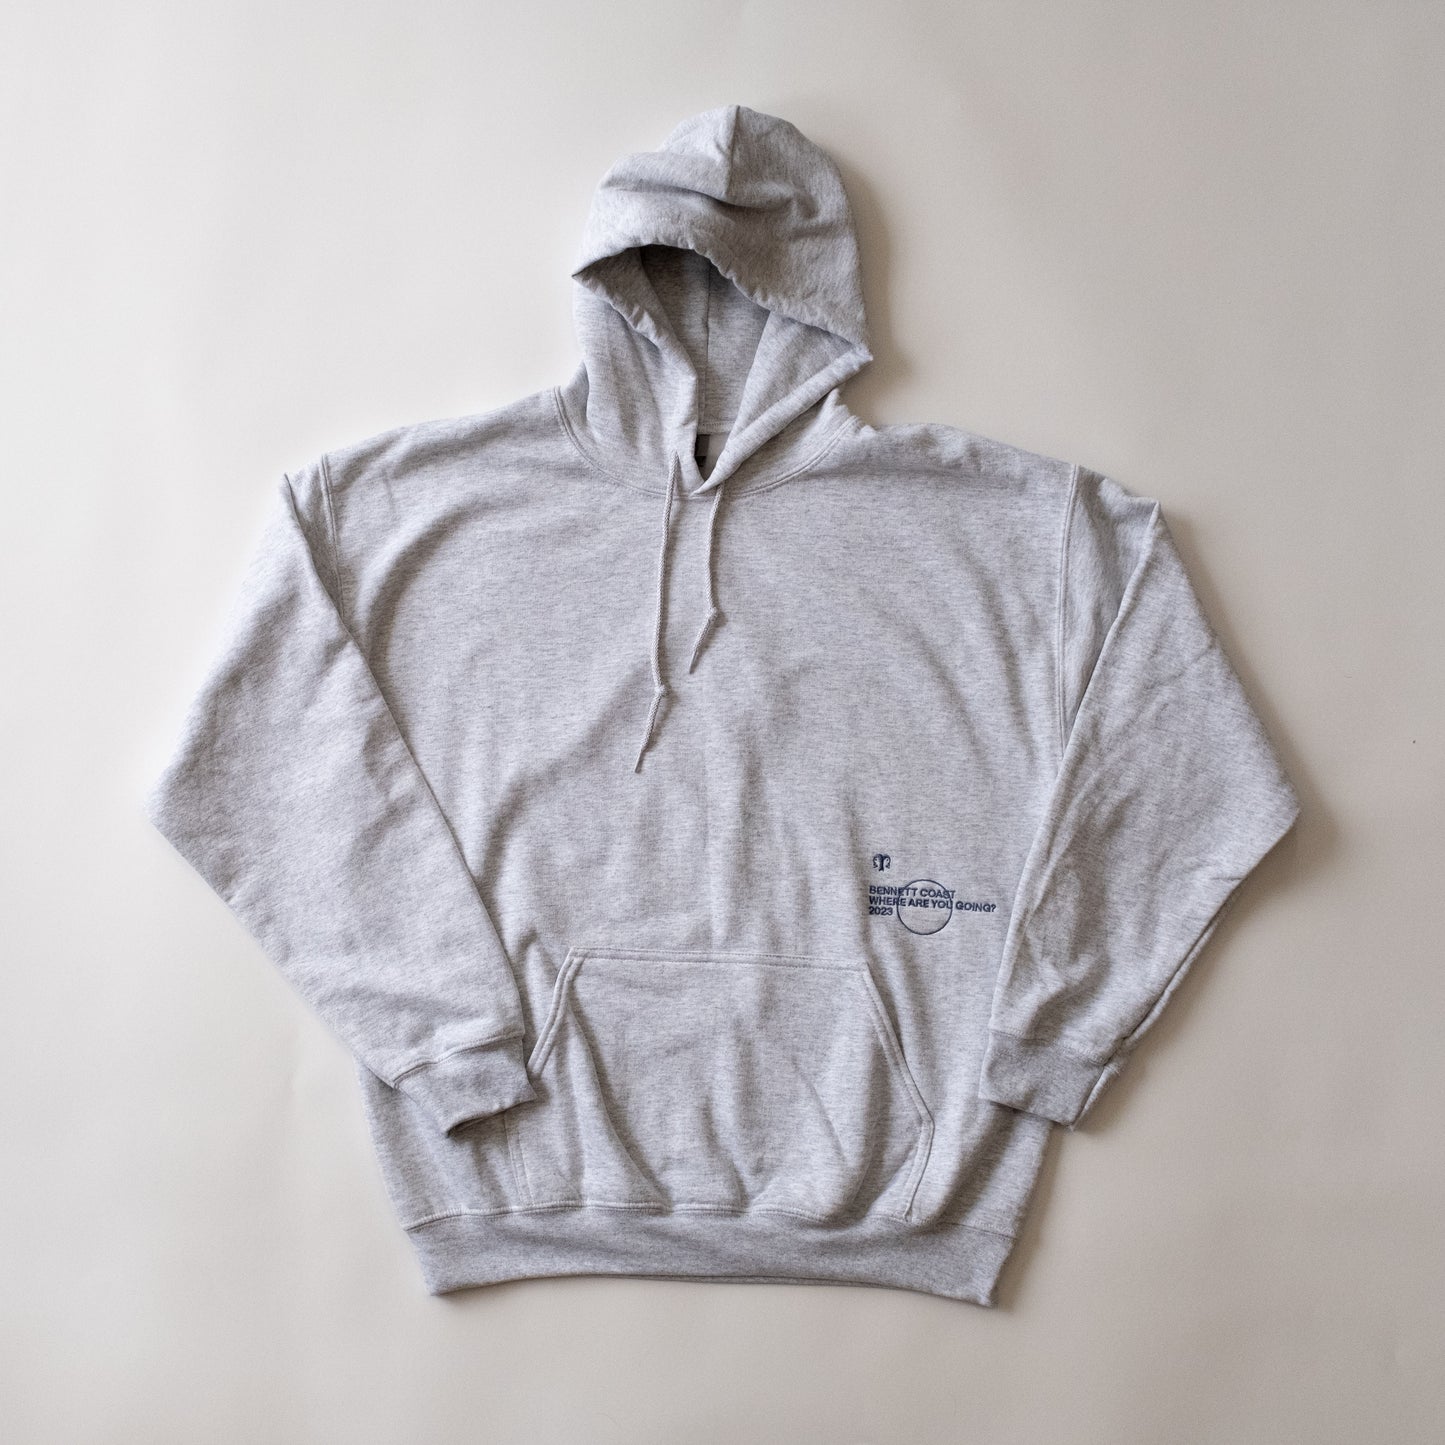 THE HOODIE 2.0 (LIMITED SIZES)